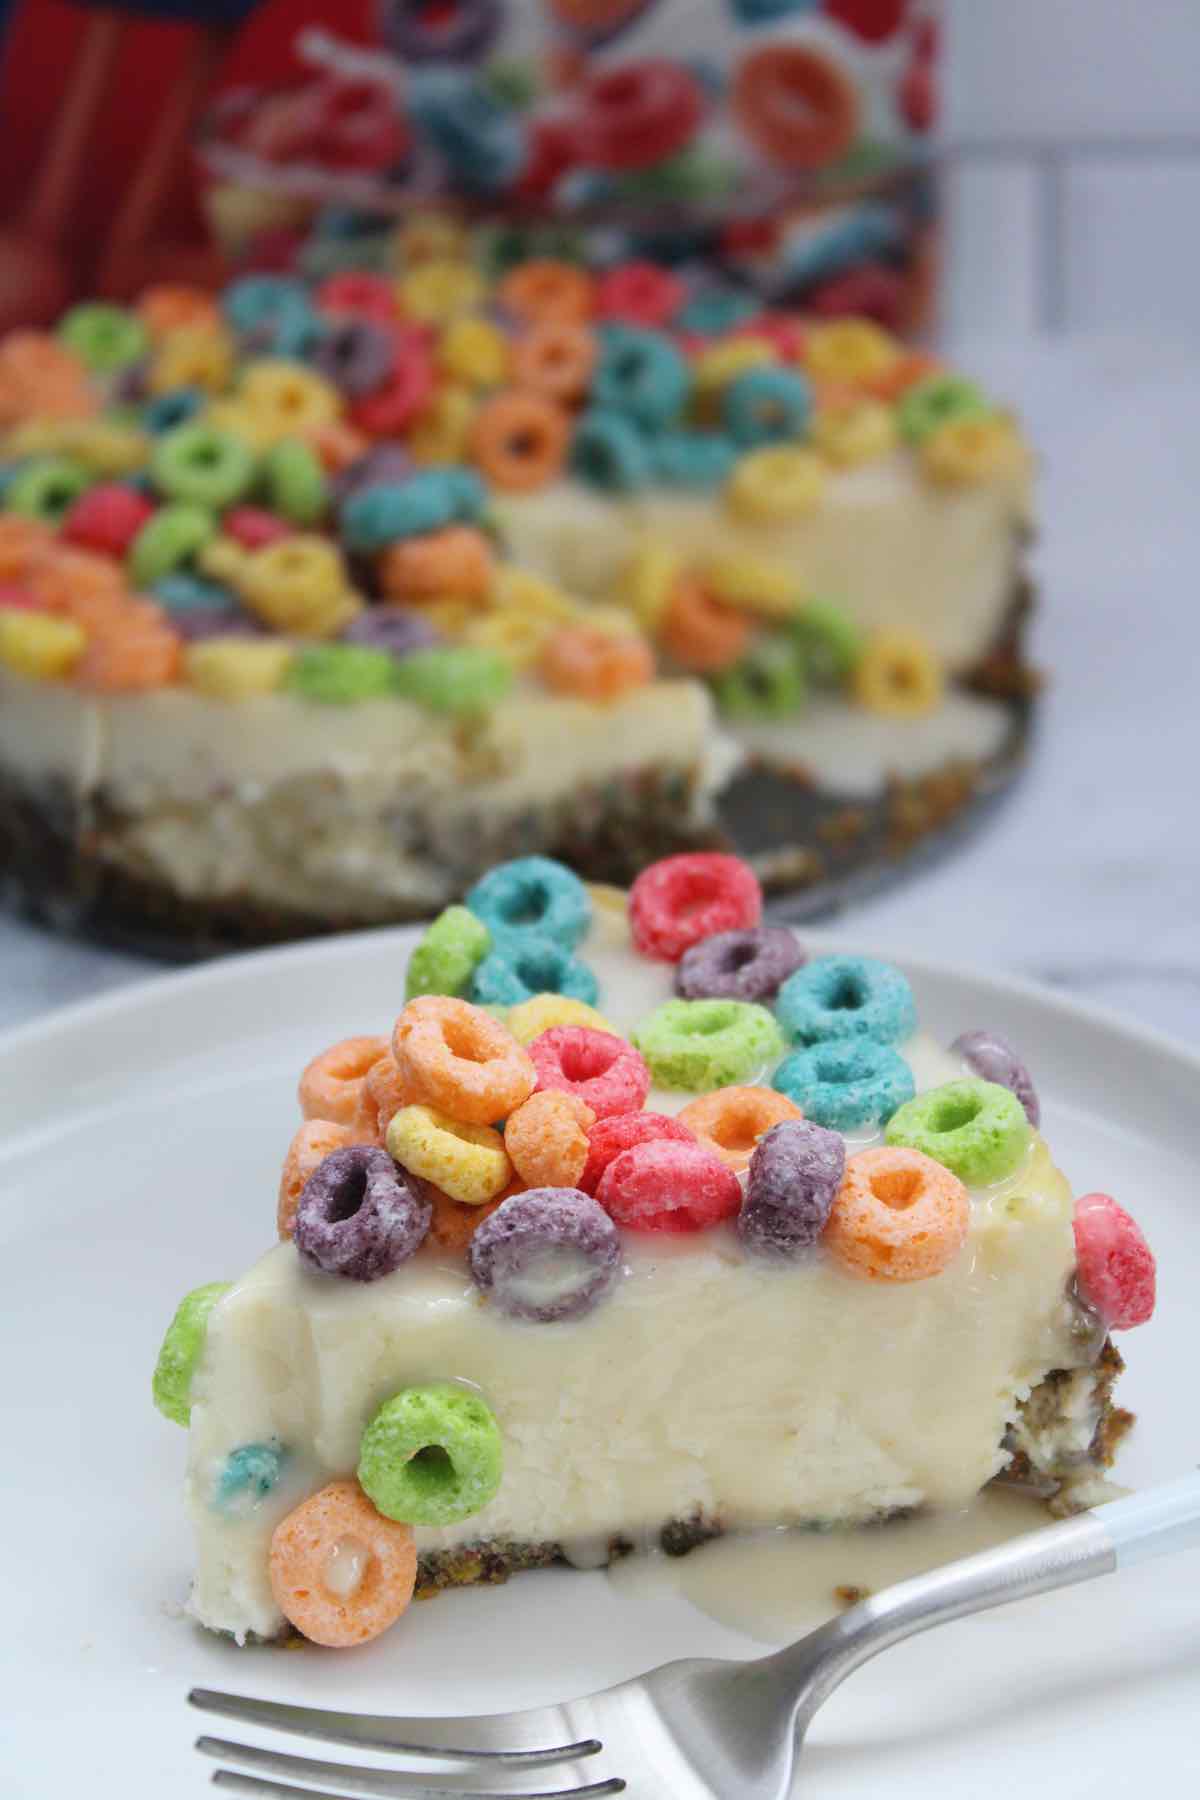 Cheesecake made with cereal